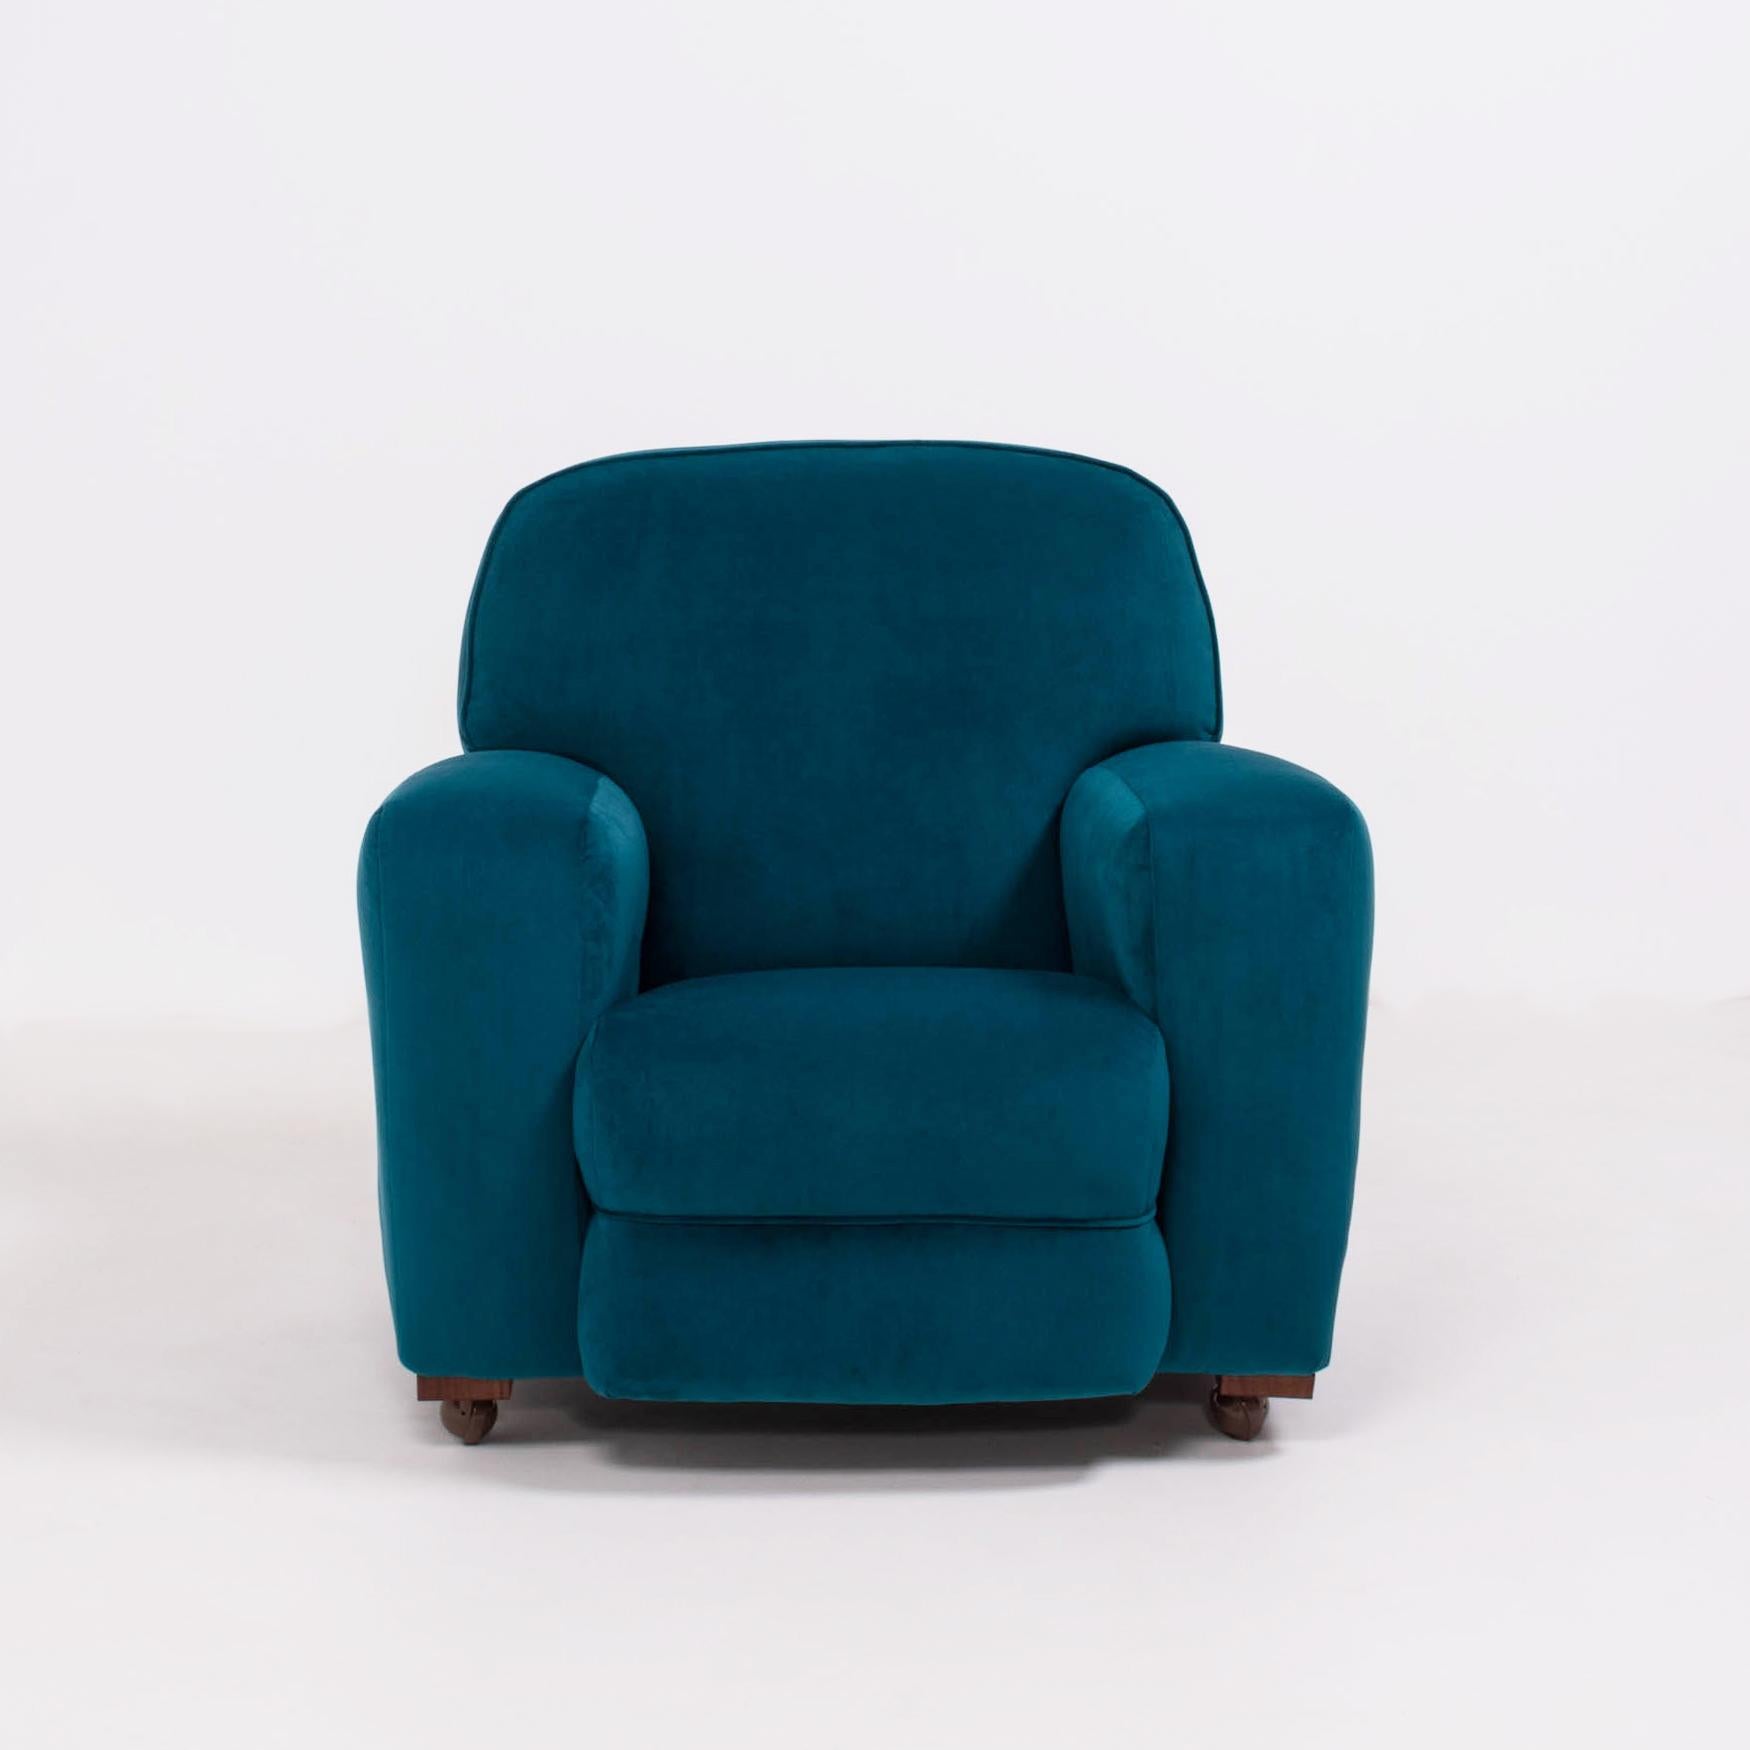 This original 1930s Art Deco curved armchair has been newly reupholstered in plush blue teal velvet, and features wide armrests and a high, comfortable back.

The blocks and castor wheels have been replaced.

Measurements: 103cm (W) x 93cm (H) x